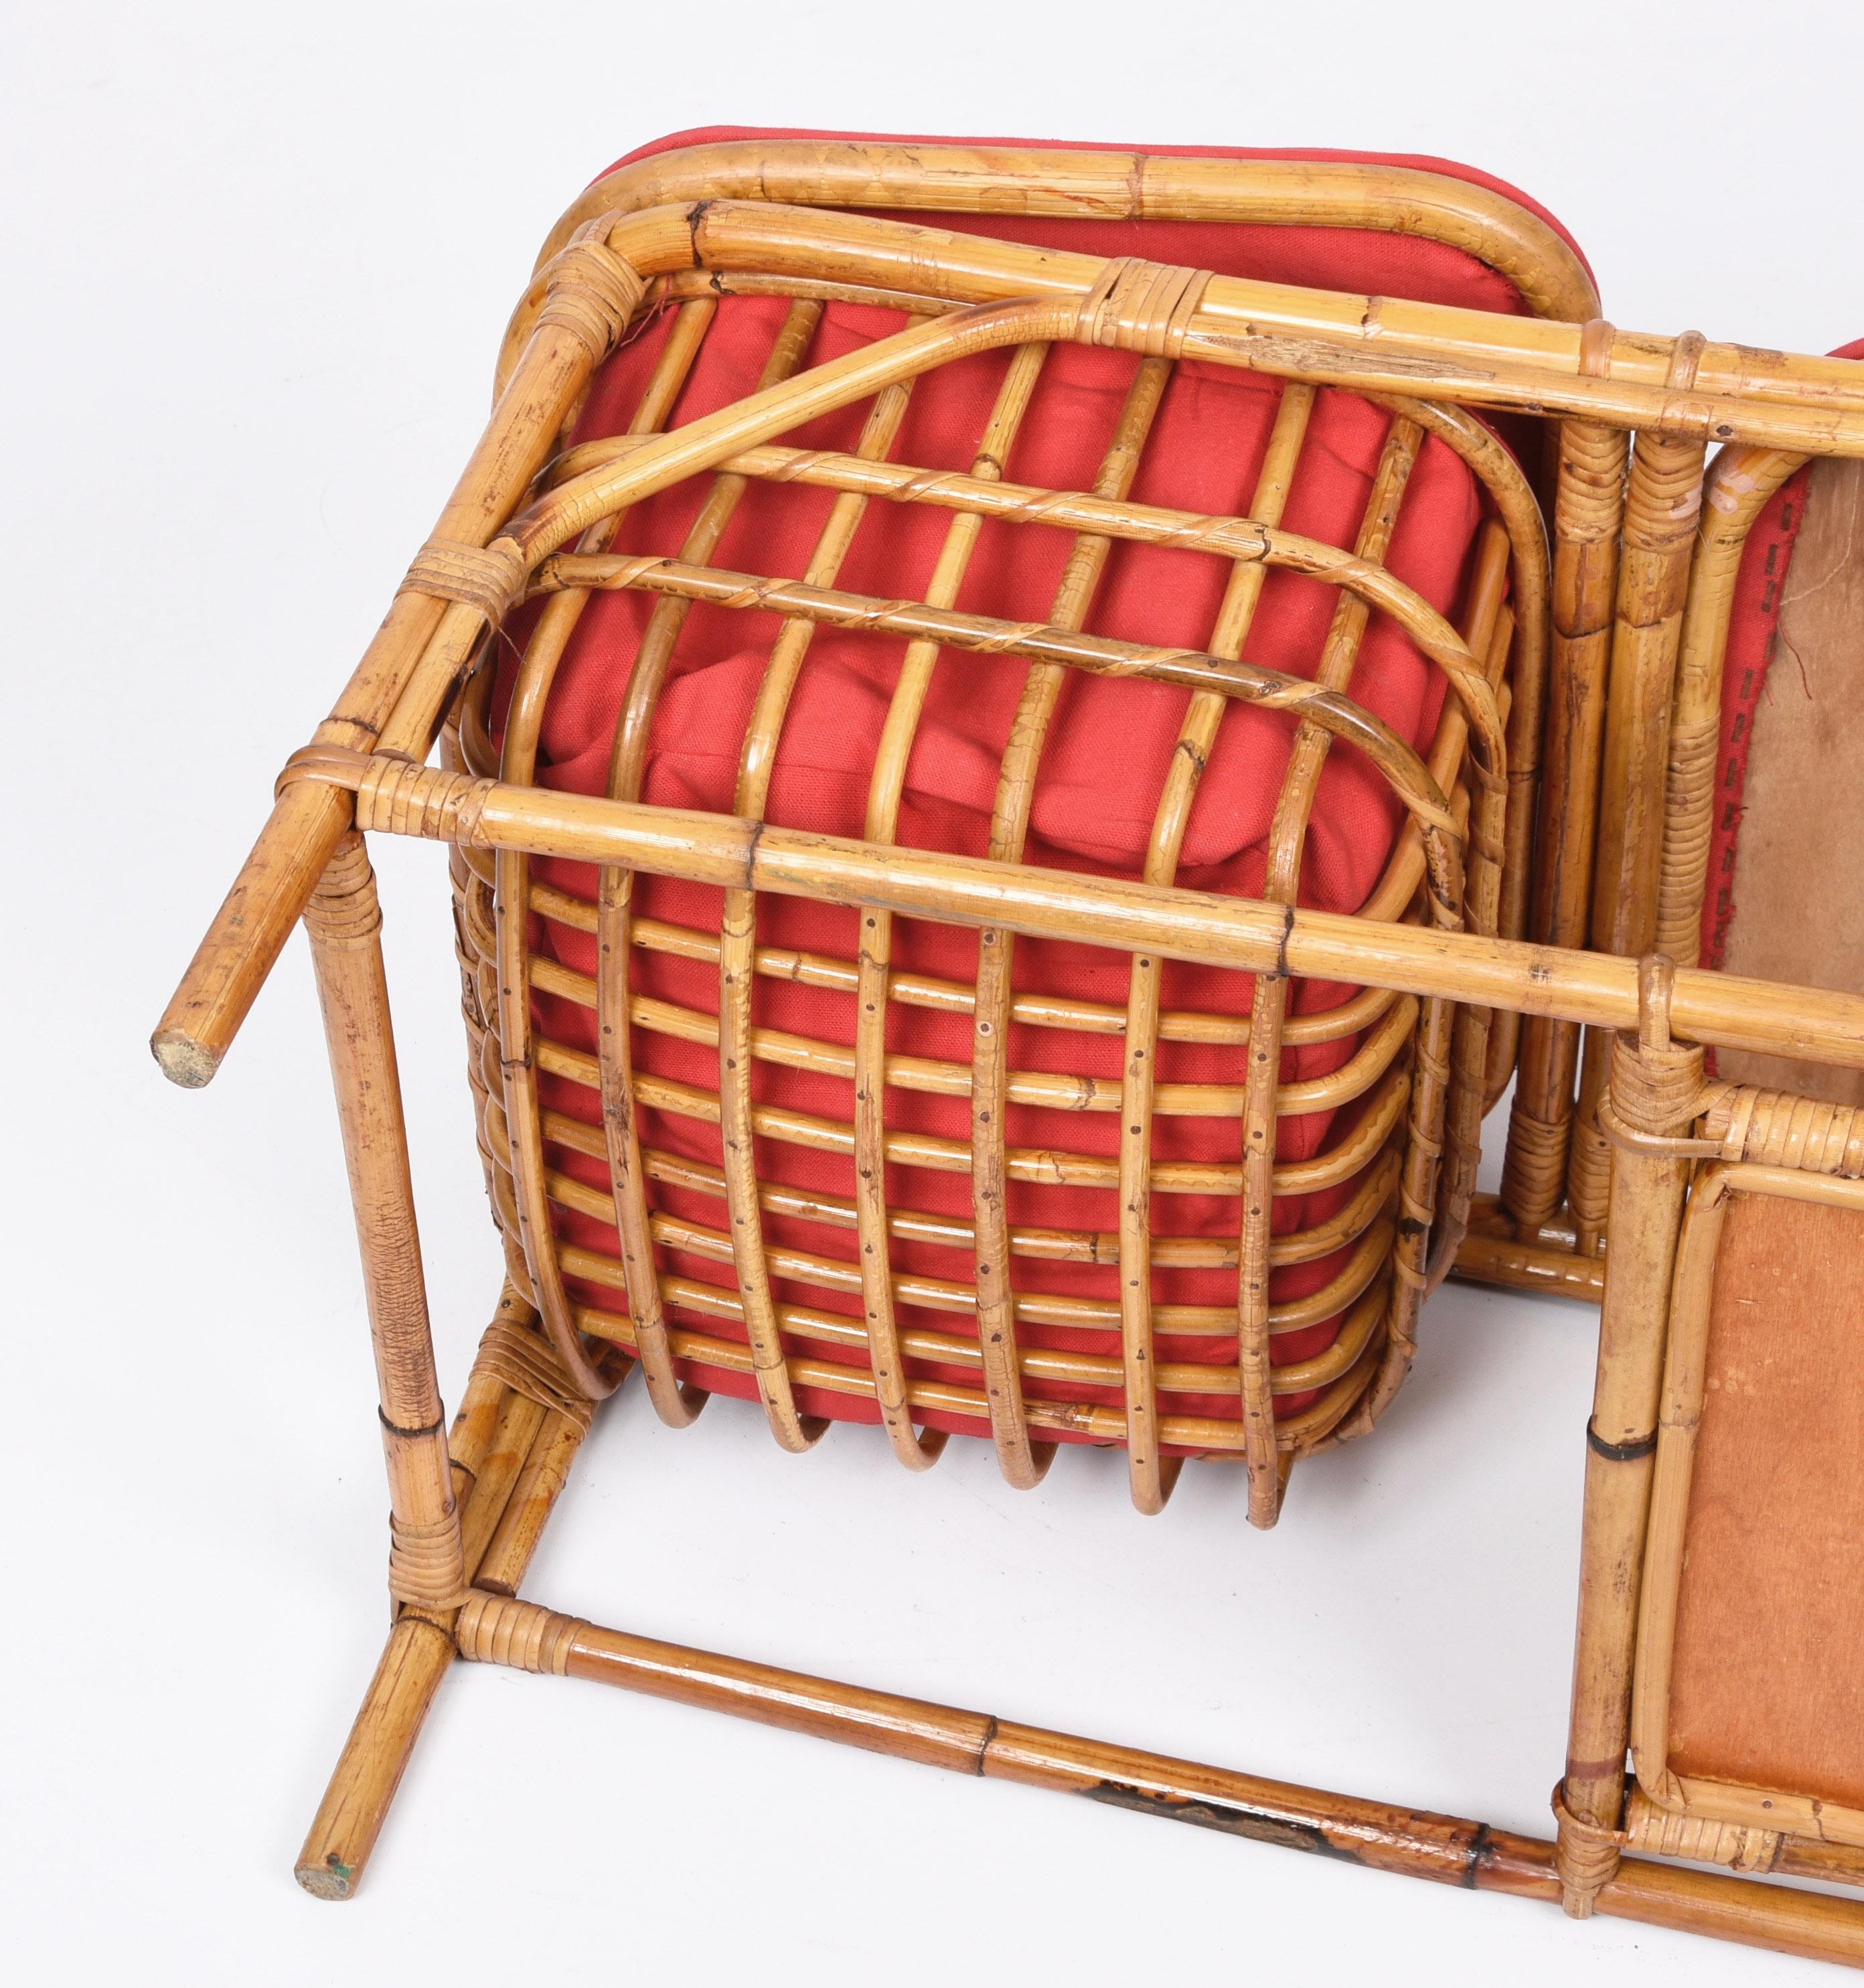 Midcentury Bamboo and Rattan Italian Bench with Box Case, 1950s For Sale 11